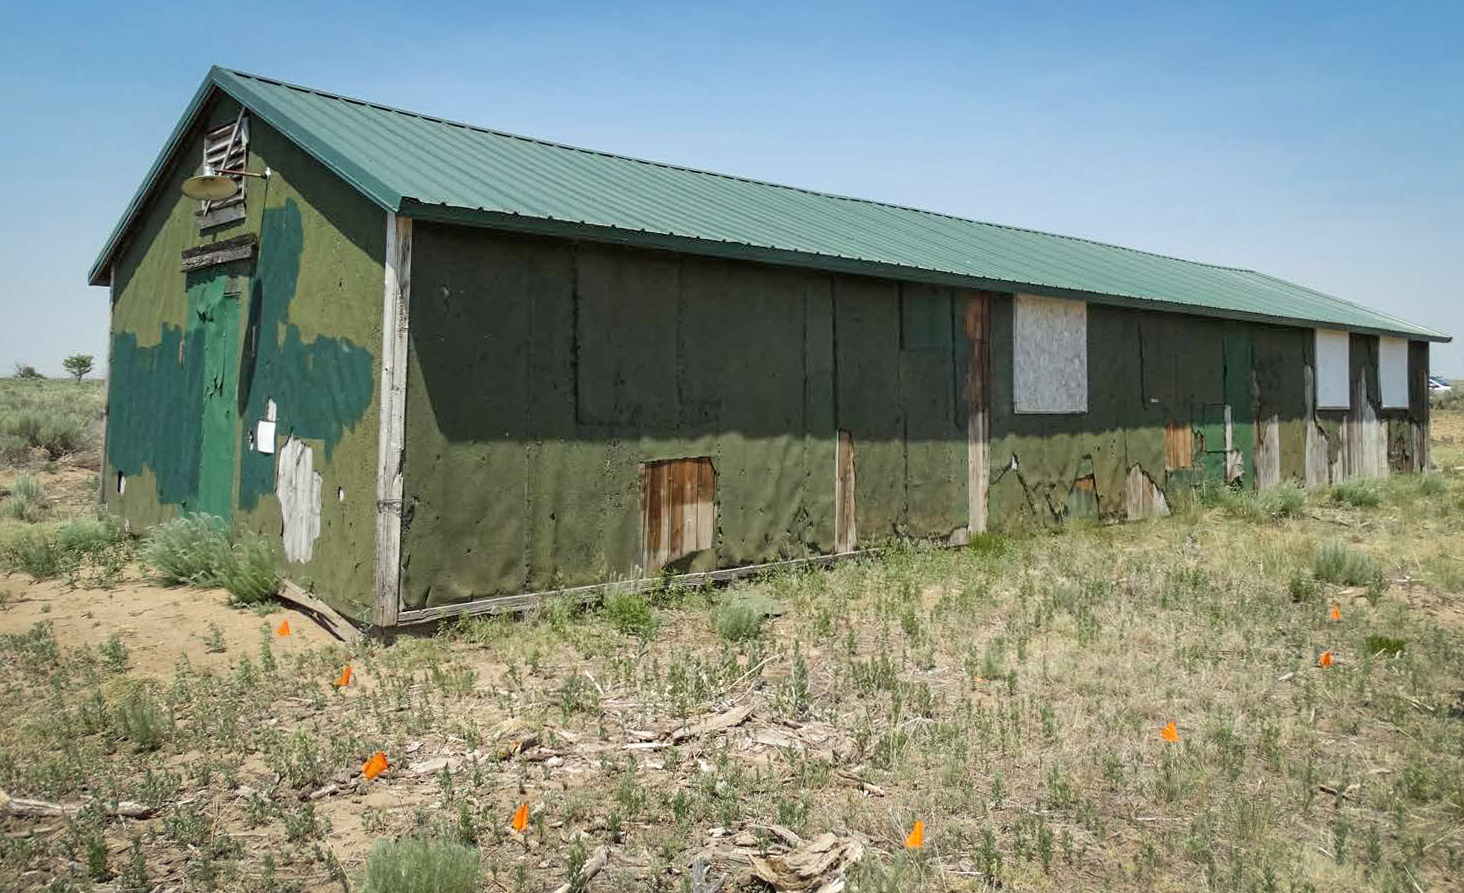 Photo of Amache building before preservation work began. The long narrow building has exposed wooden frame and green metal roof, with boarded up windows and sits in the middle of an arid plain with only weeds surrounding it.